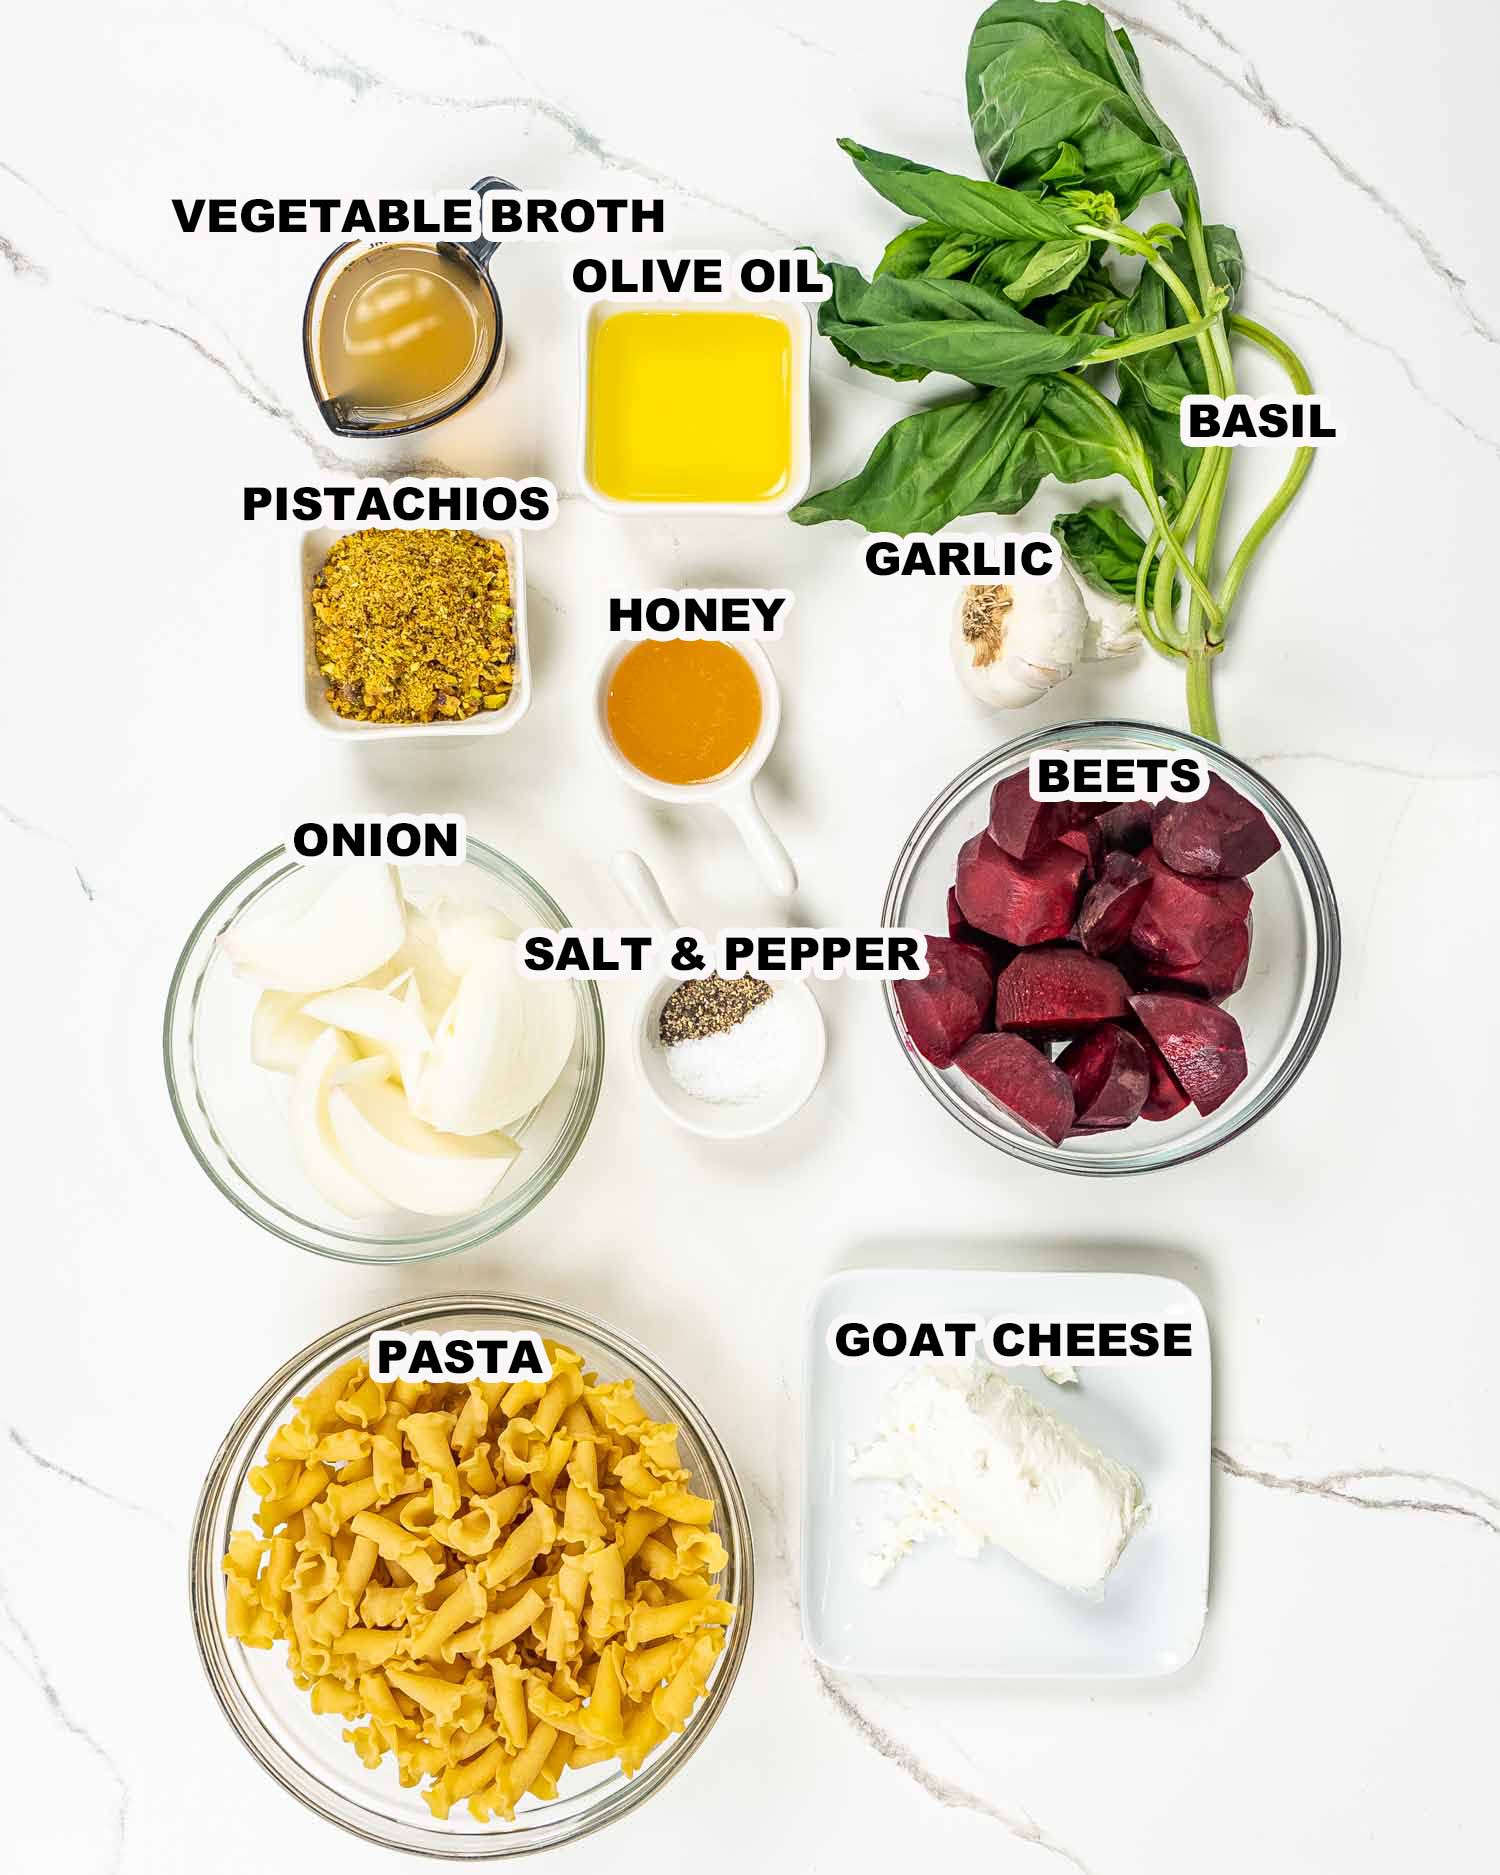 ingredients needed to make beets and goat cheese pasta.